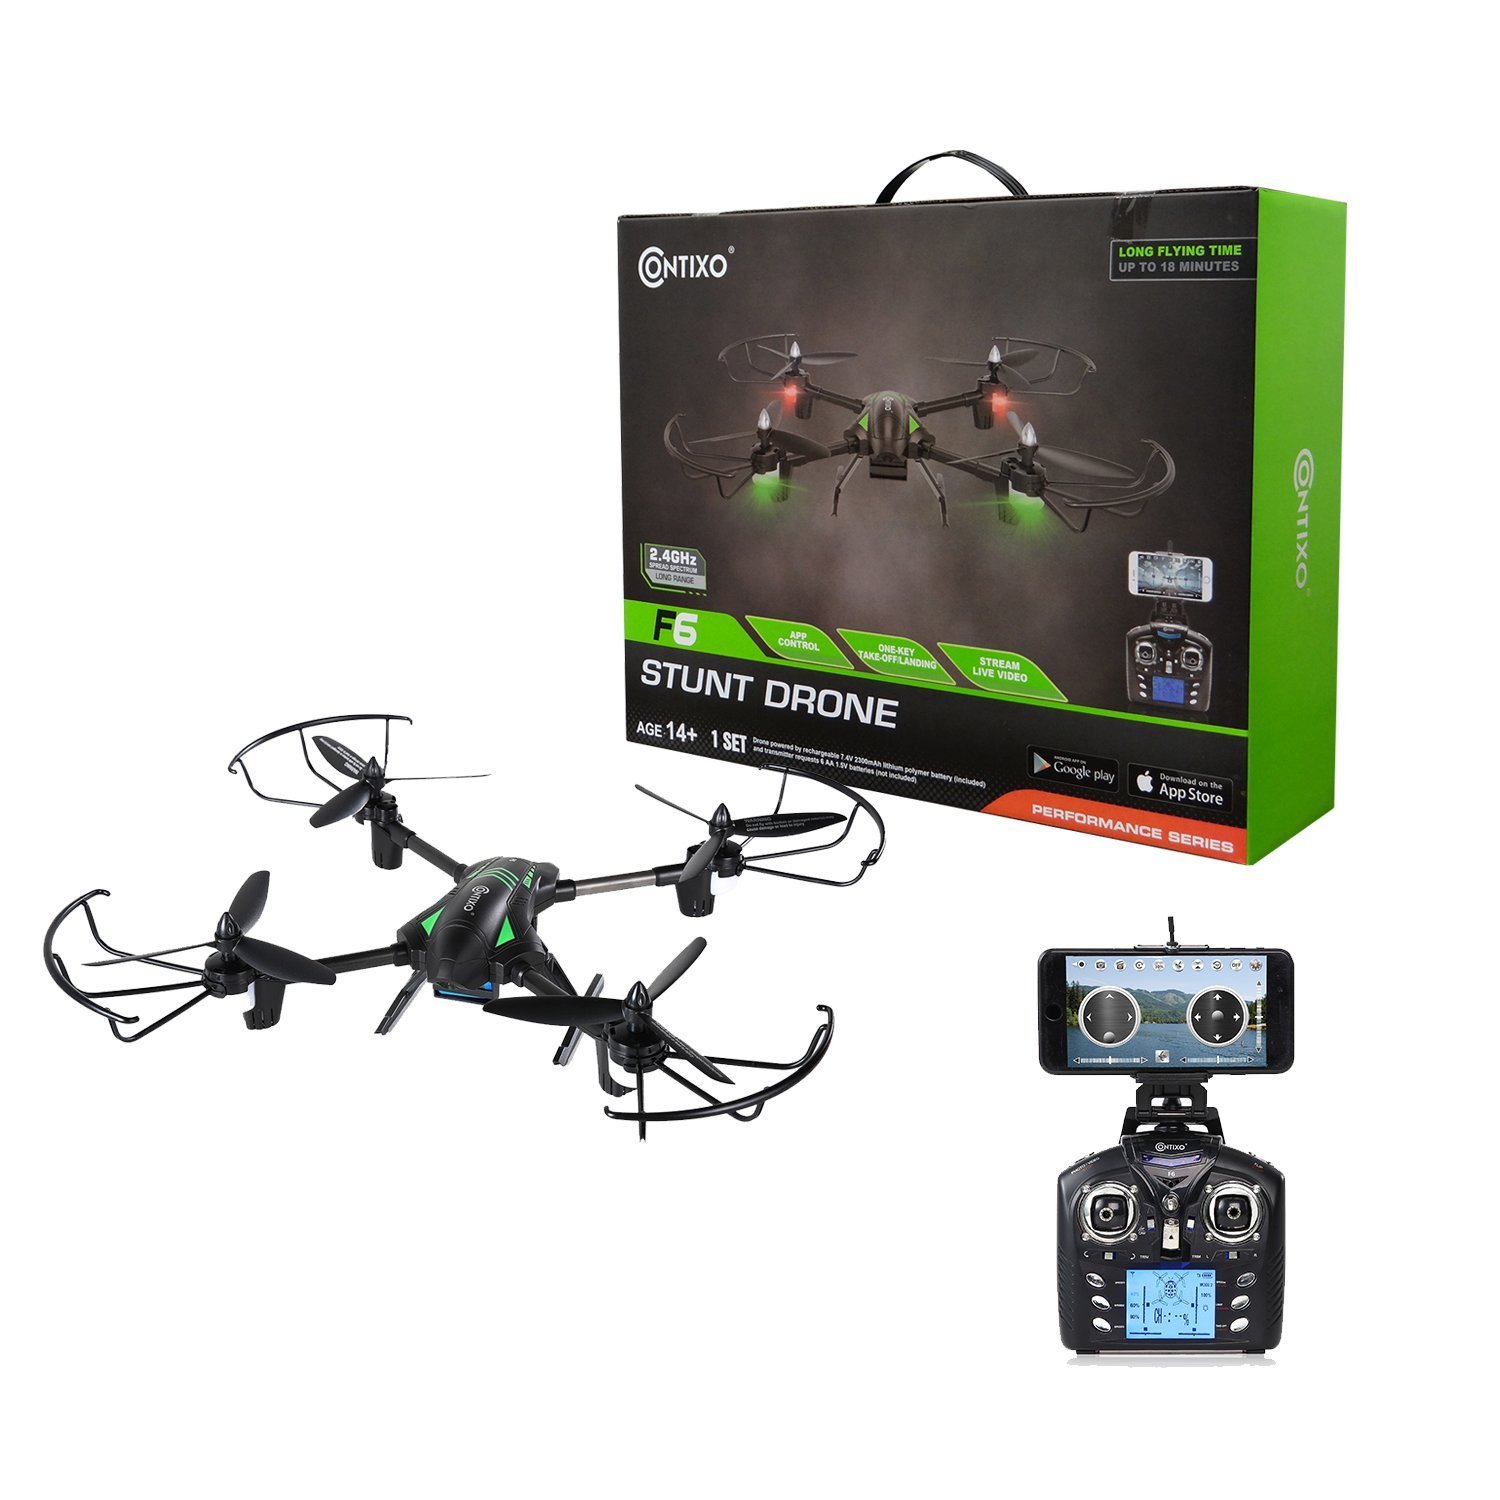 VALENTINES SALE! Contixo F6 RC Quadcopter Racing Drone 2.4Ghz 720P Rotating HD Video Camera Live FPV Headless Mode Up to 18min Fly Time Mobile App Altitude Hold VR Compatible - Best Gift